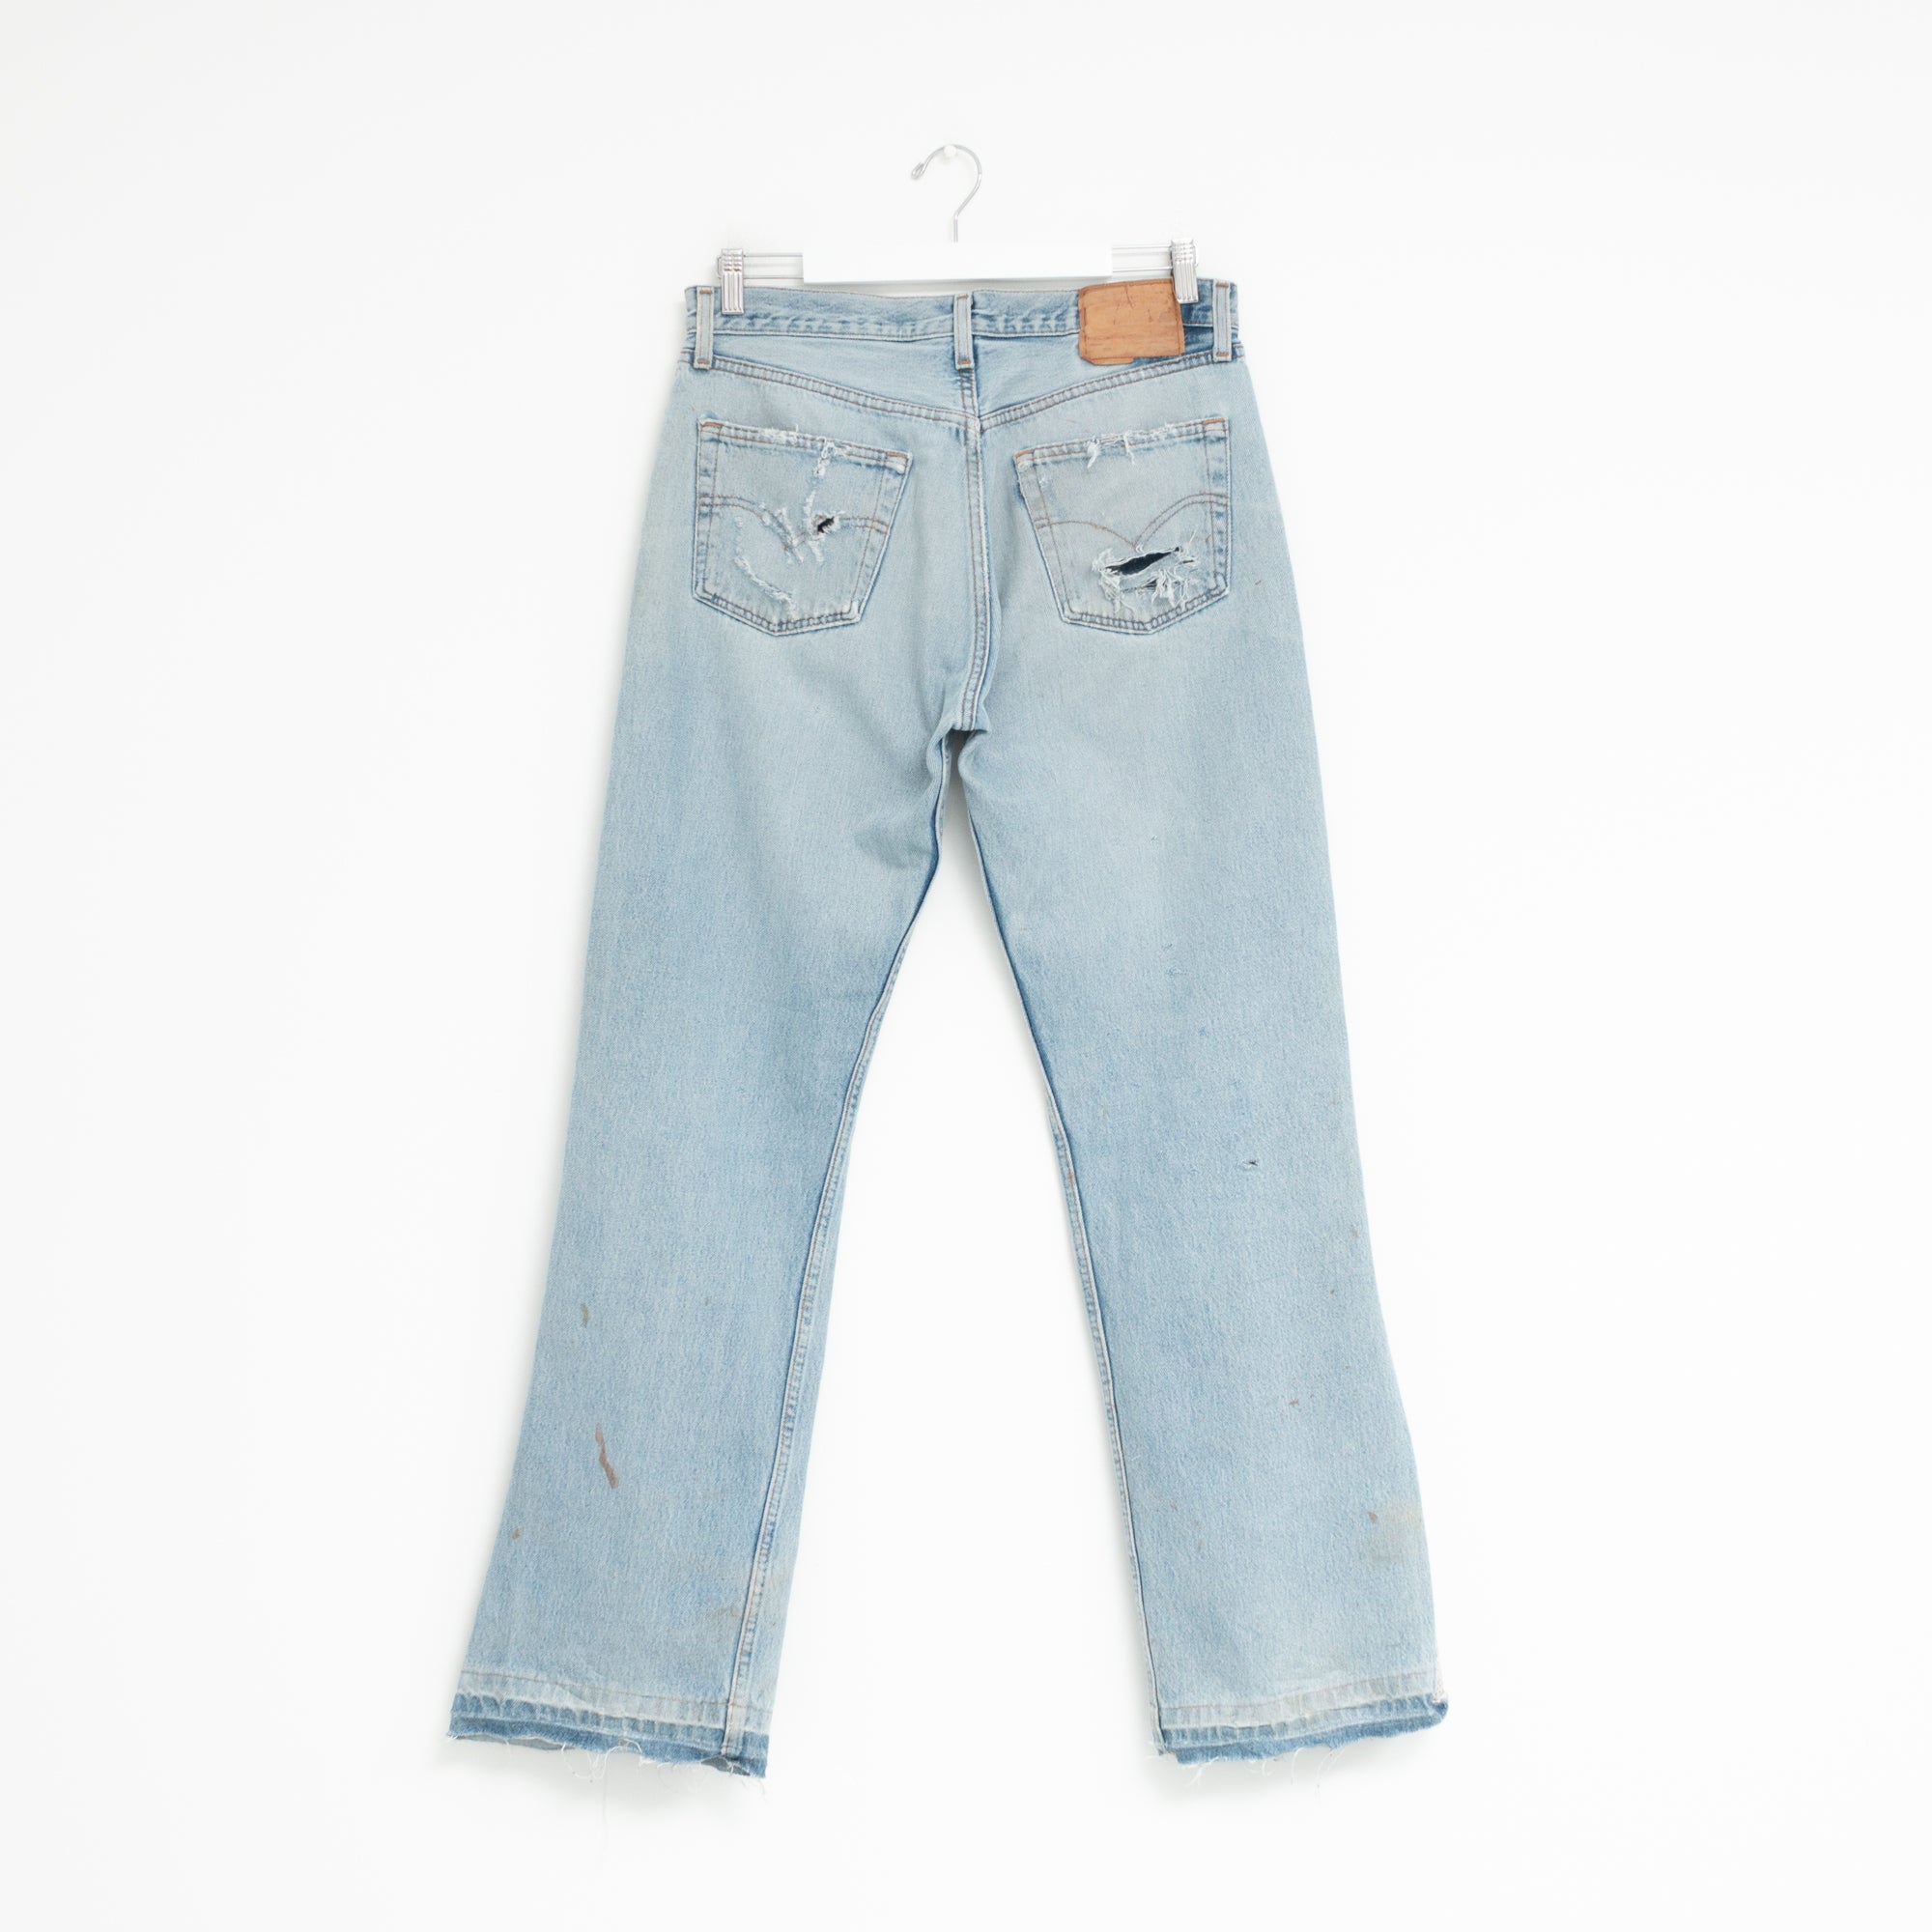 "LE FLARE" Jeans W33 L33